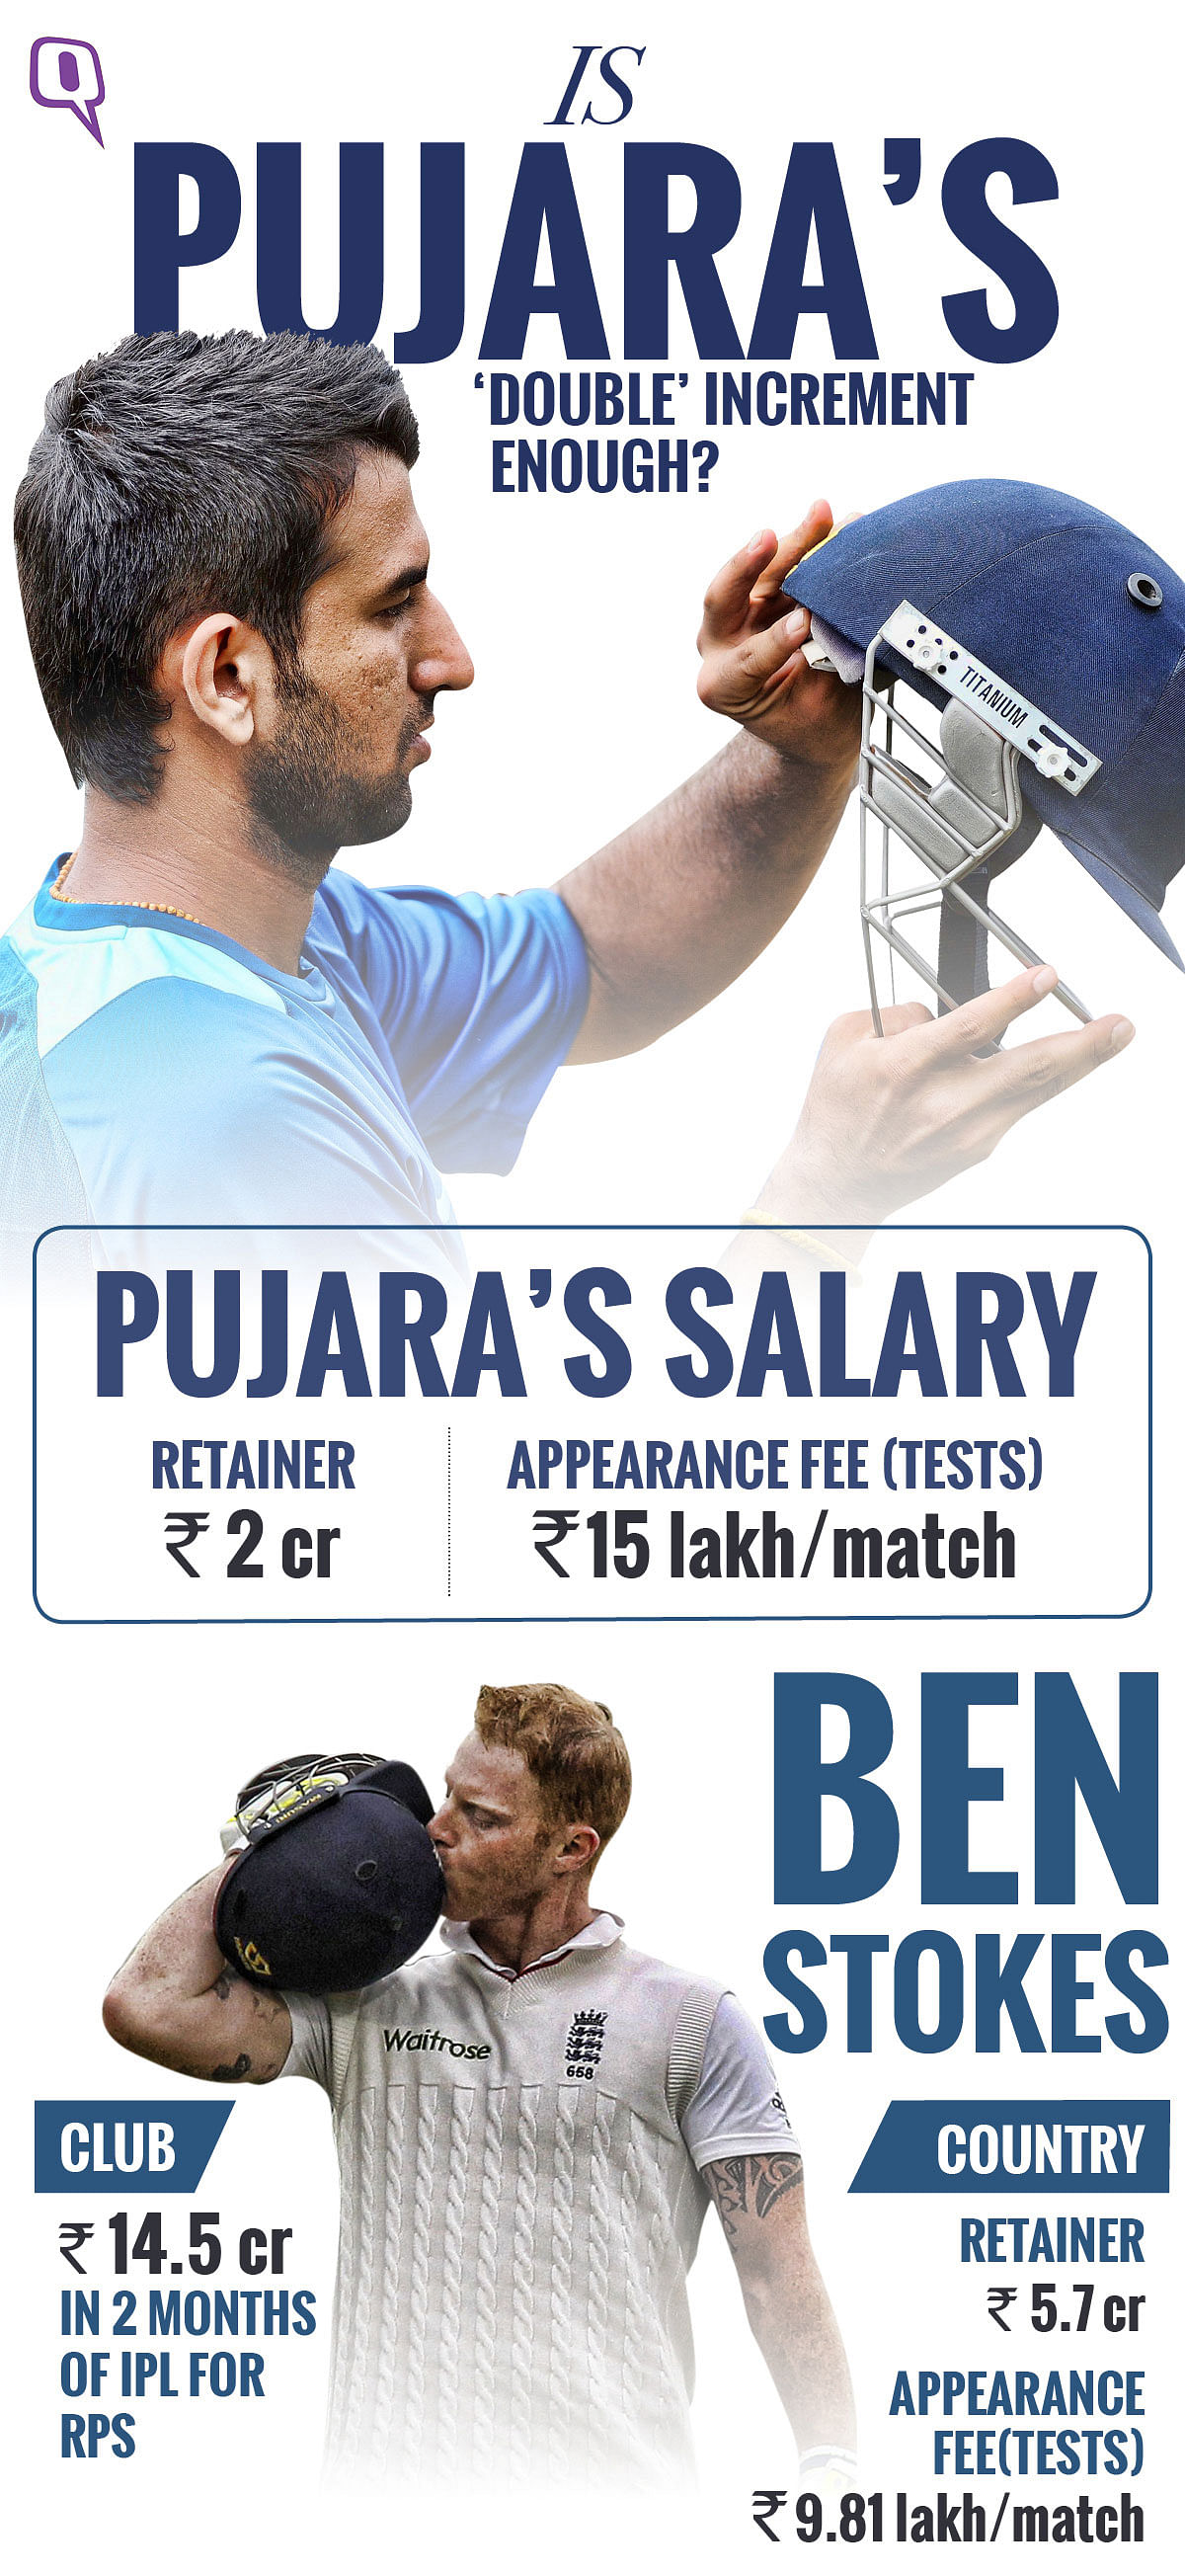 Should Pujara take a financial hit just because he has dedicated his career to the longest format of cricket?